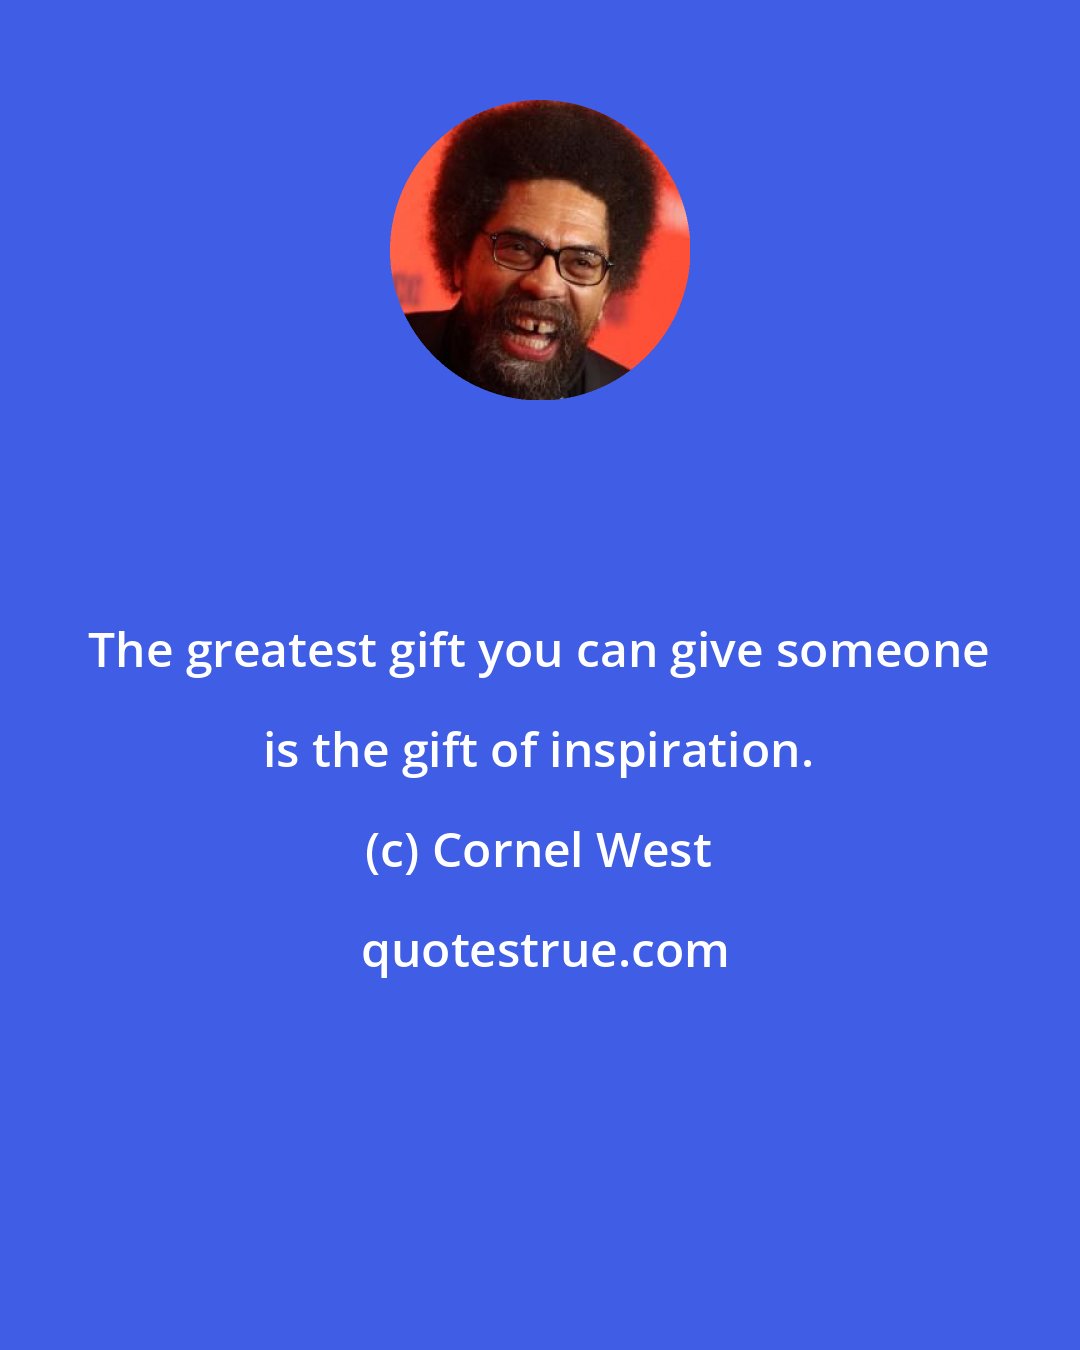 Cornel West: The greatest gift you can give someone is the gift of inspiration.